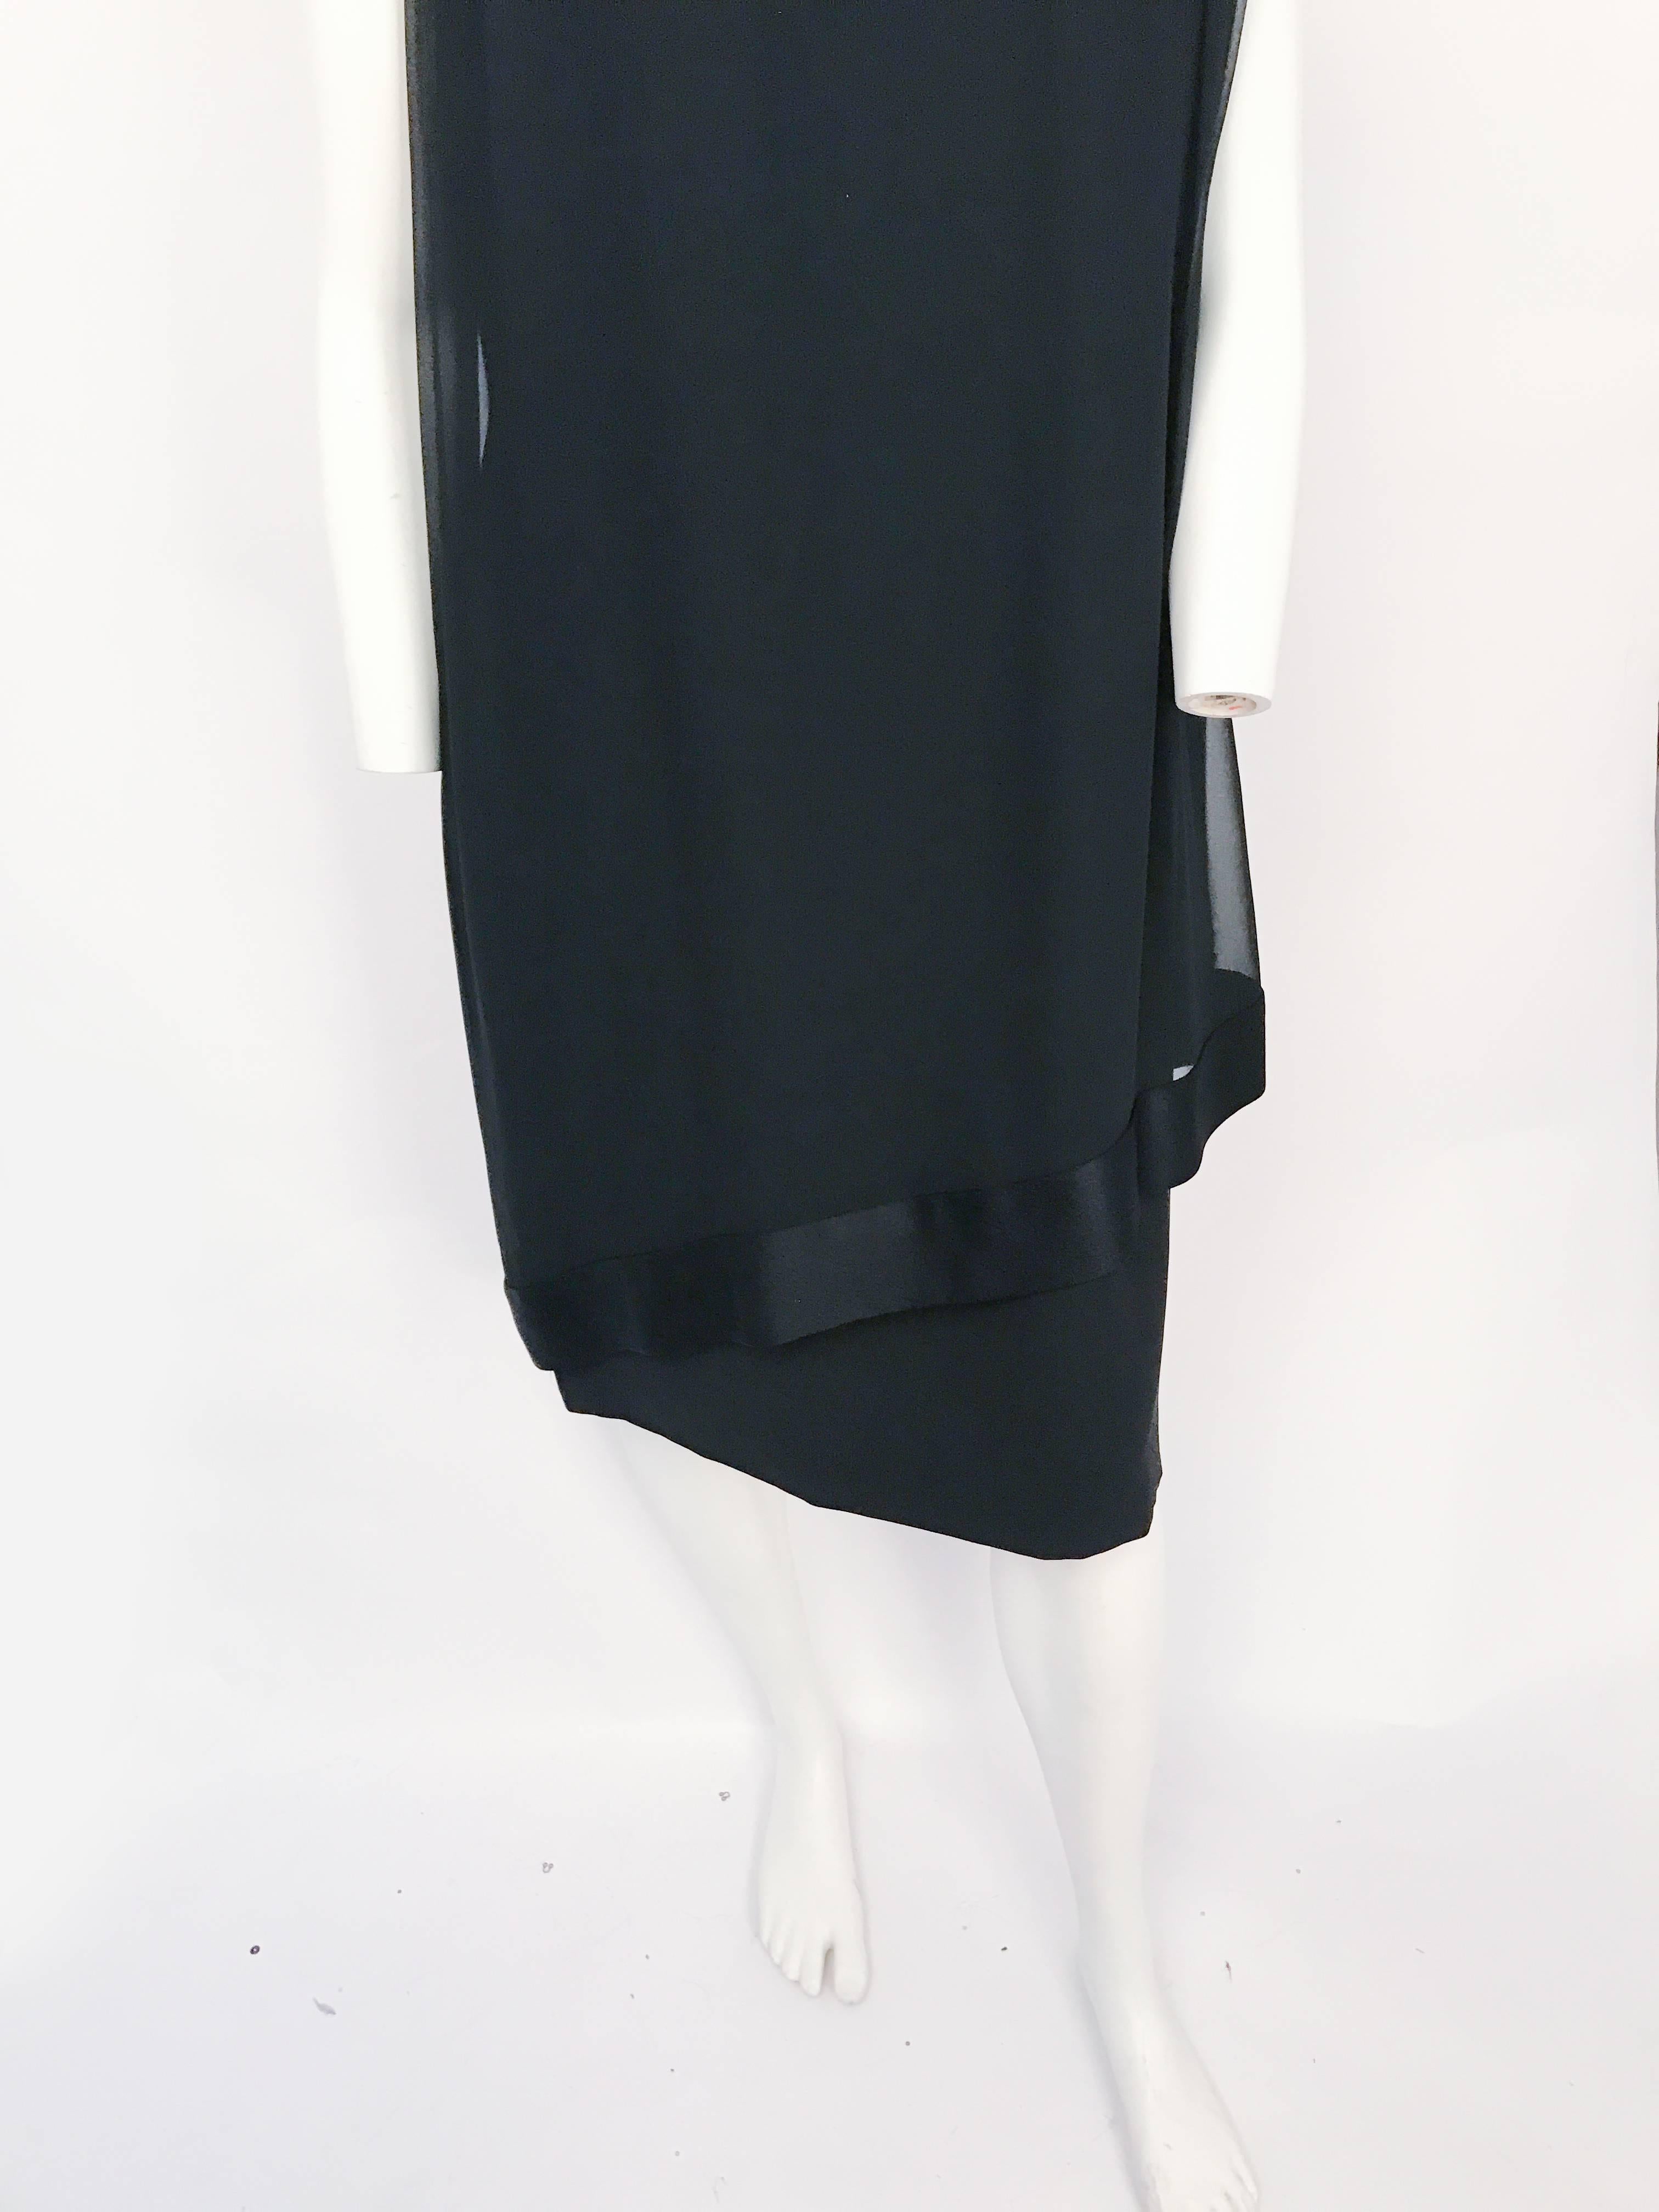 1960s Black Silk Crepe Sheath Dress with Chiffon and Satin Drape. Black silk crepe sheath dress with silk chiffon and satin asymmetrical drape in the front and an oversized bow and gathering along the back. It has the original metal zipper and hood